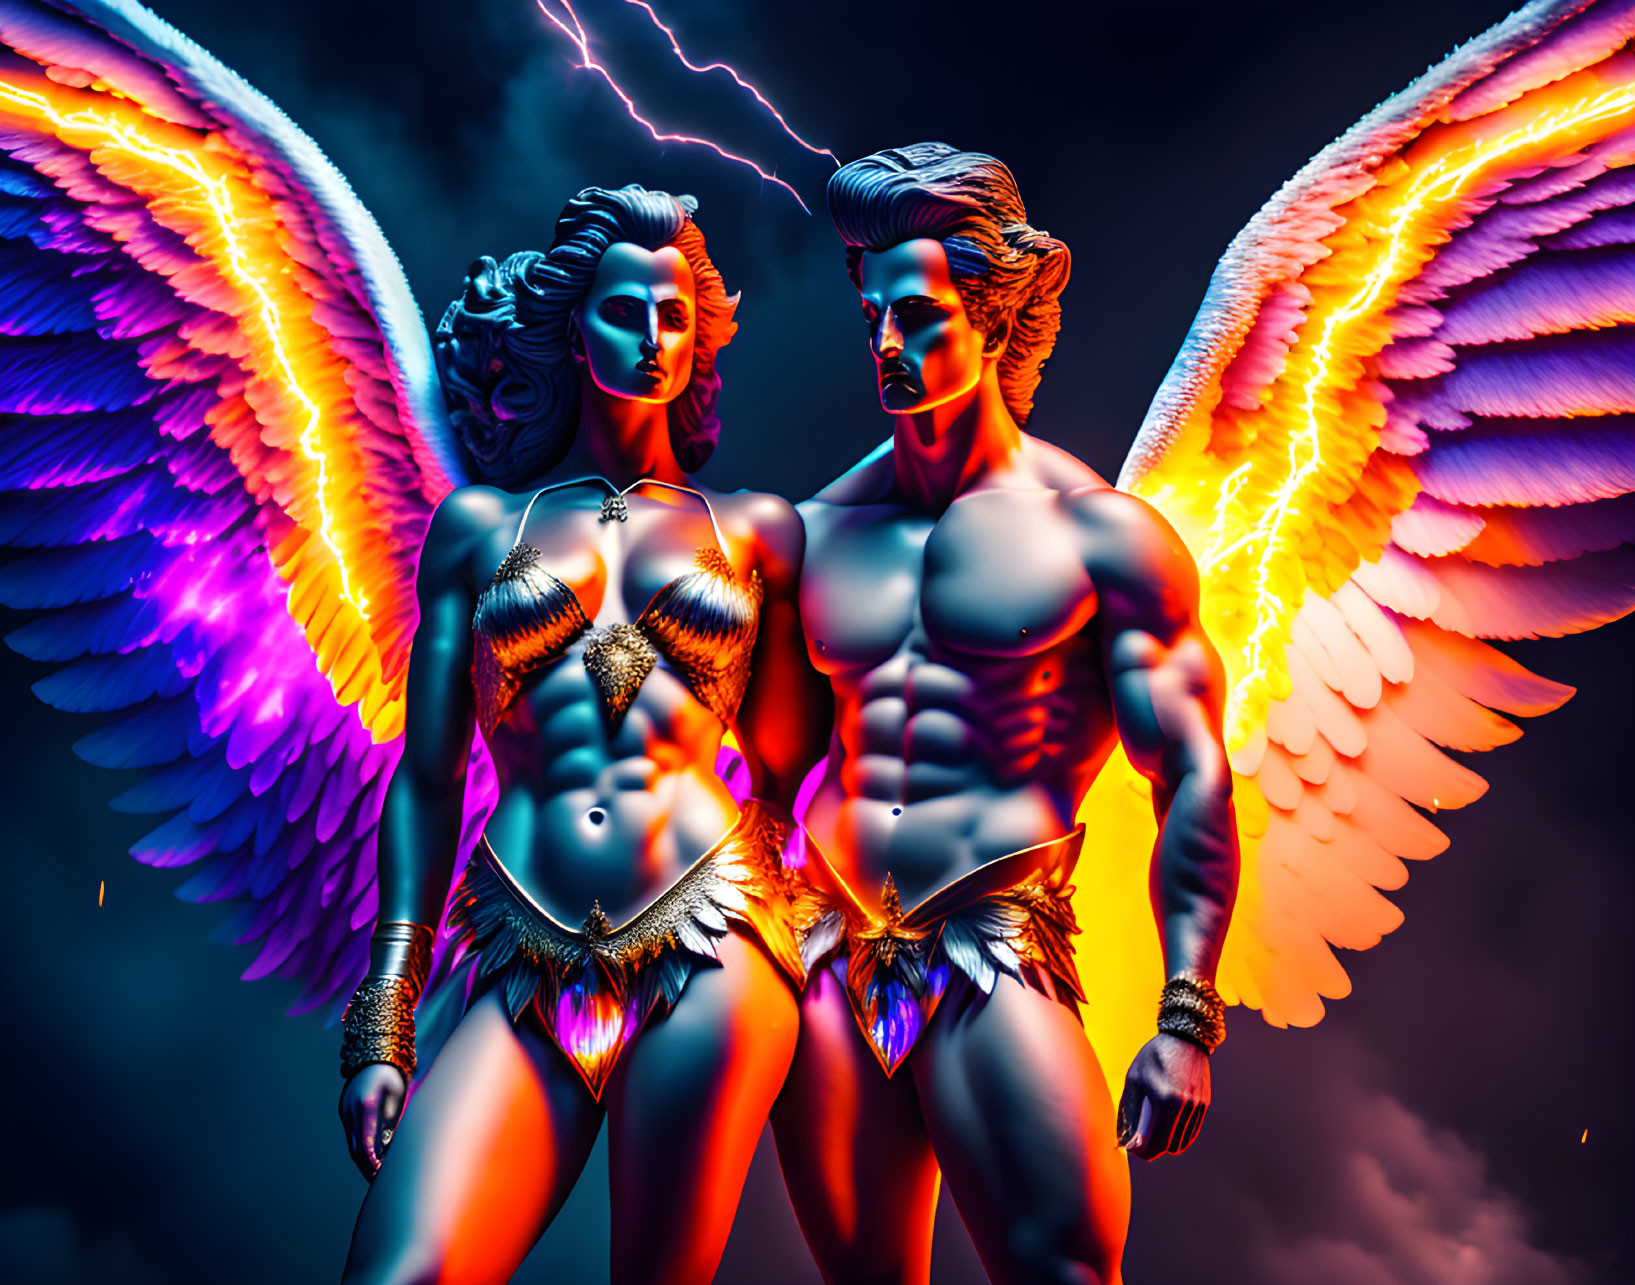 Vibrant winged figures under stormy sky